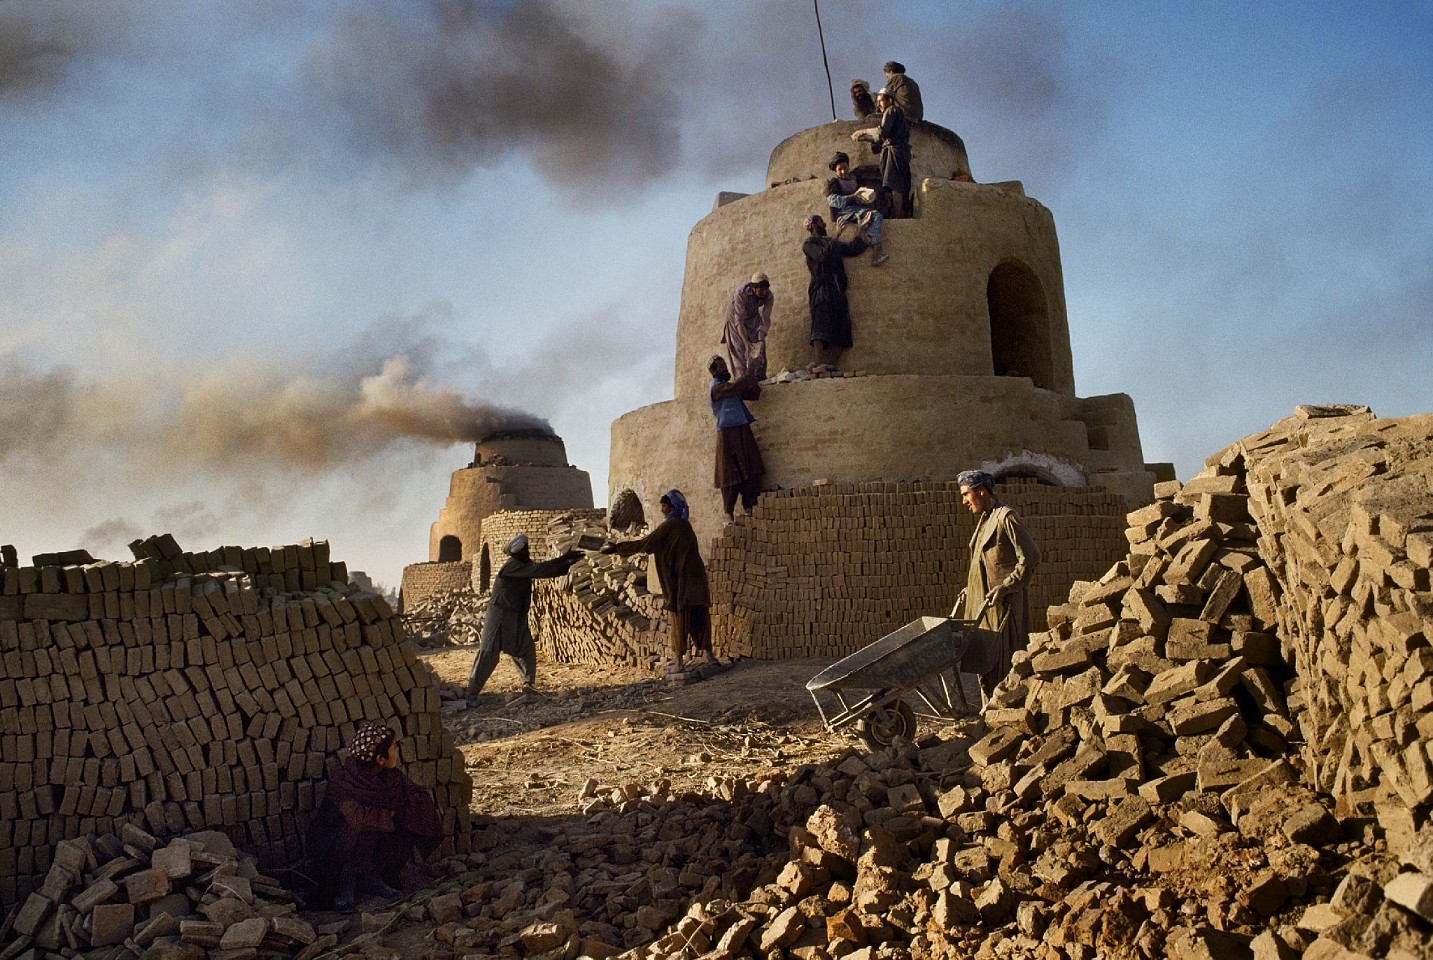 Steve McCurry, Brick Kiln Workers, 1992
FujiFlex Crystal Archive Print
Price/Size on request